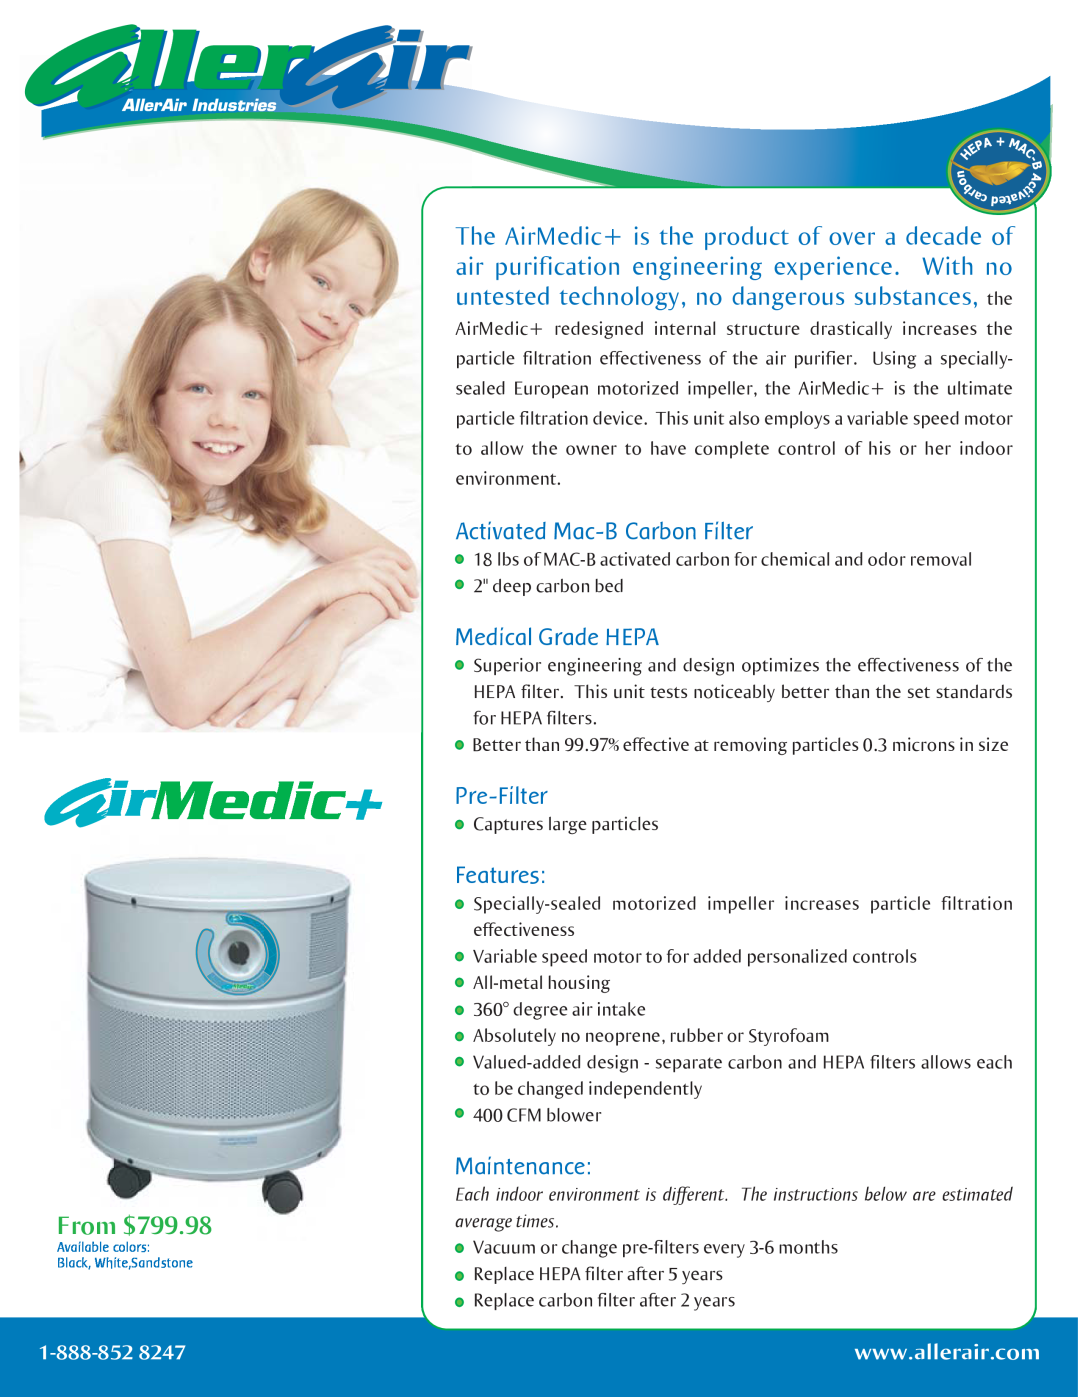 AllerAir Air Purifier manual Medic+, From $799.98, Activated Mac-BCarbon Filter, Medical Grade HEPA, Pre-Filter, Features 